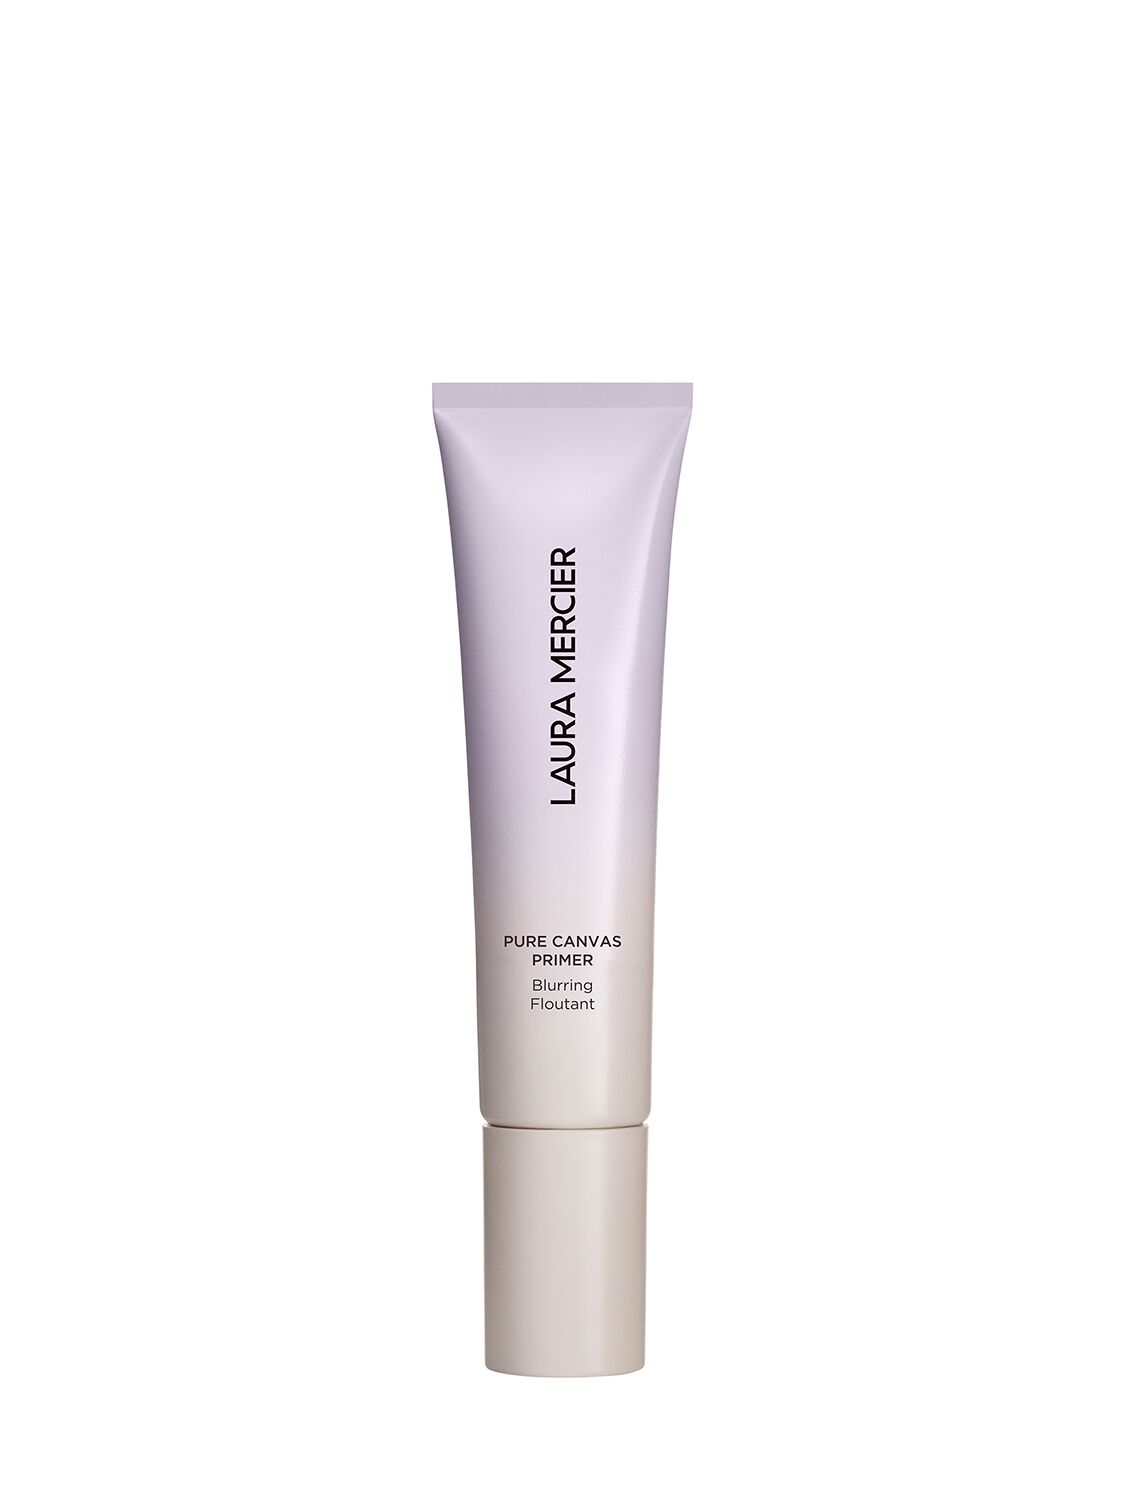 Image of 30ml New Pure Canvas Primer Blurring